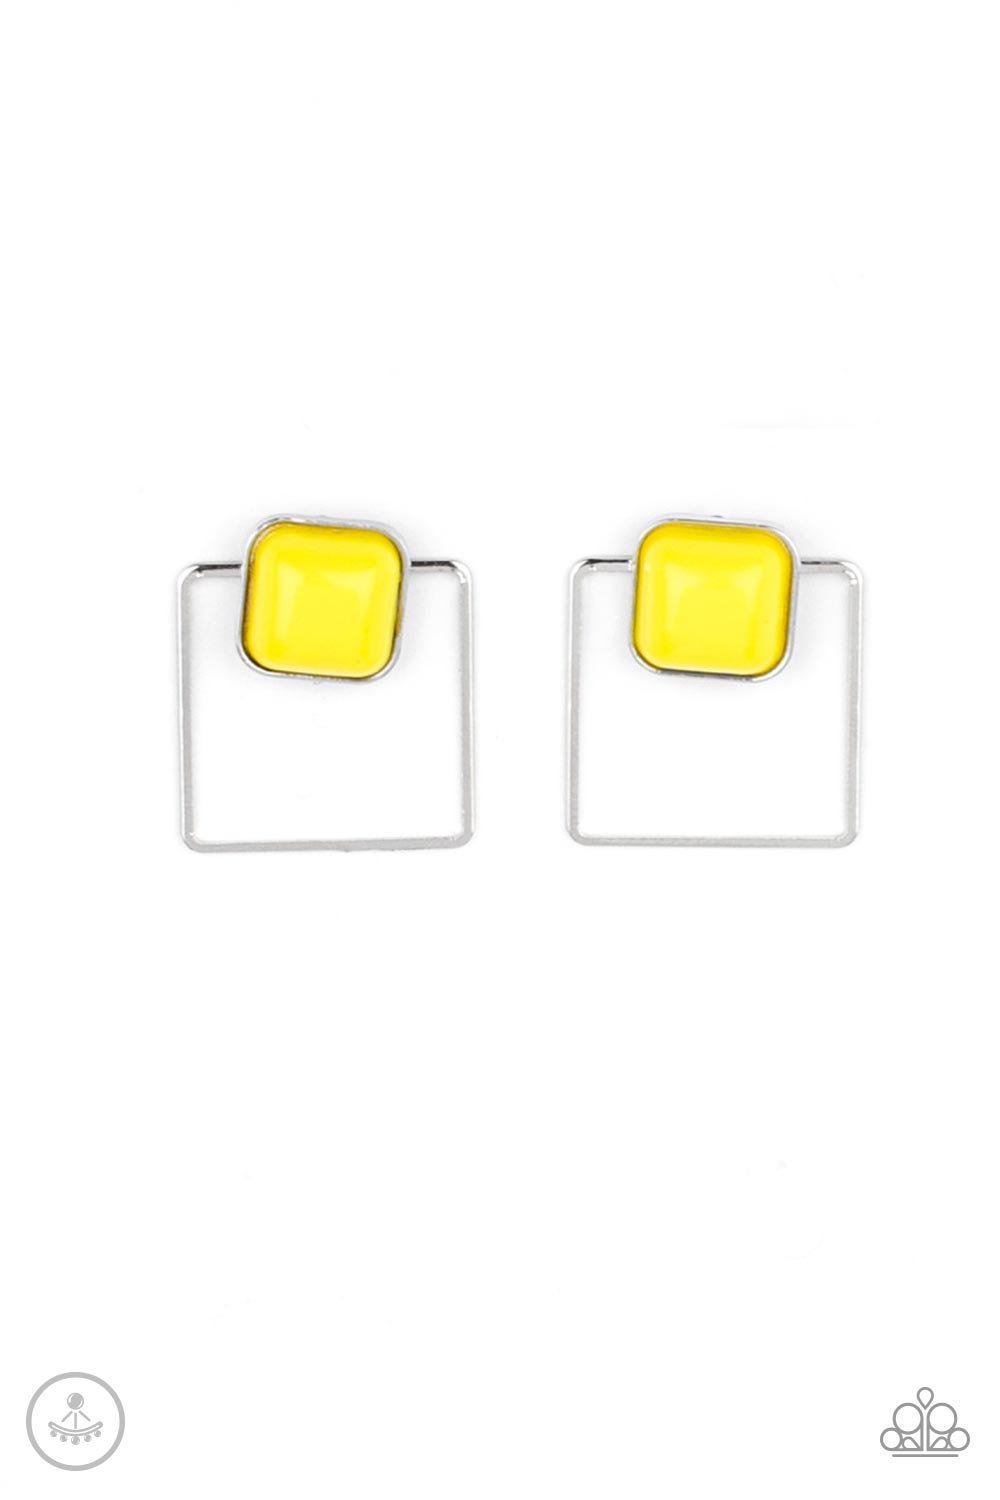 FLAIR and Square - Yellow - Jewelz of Joy Boutique